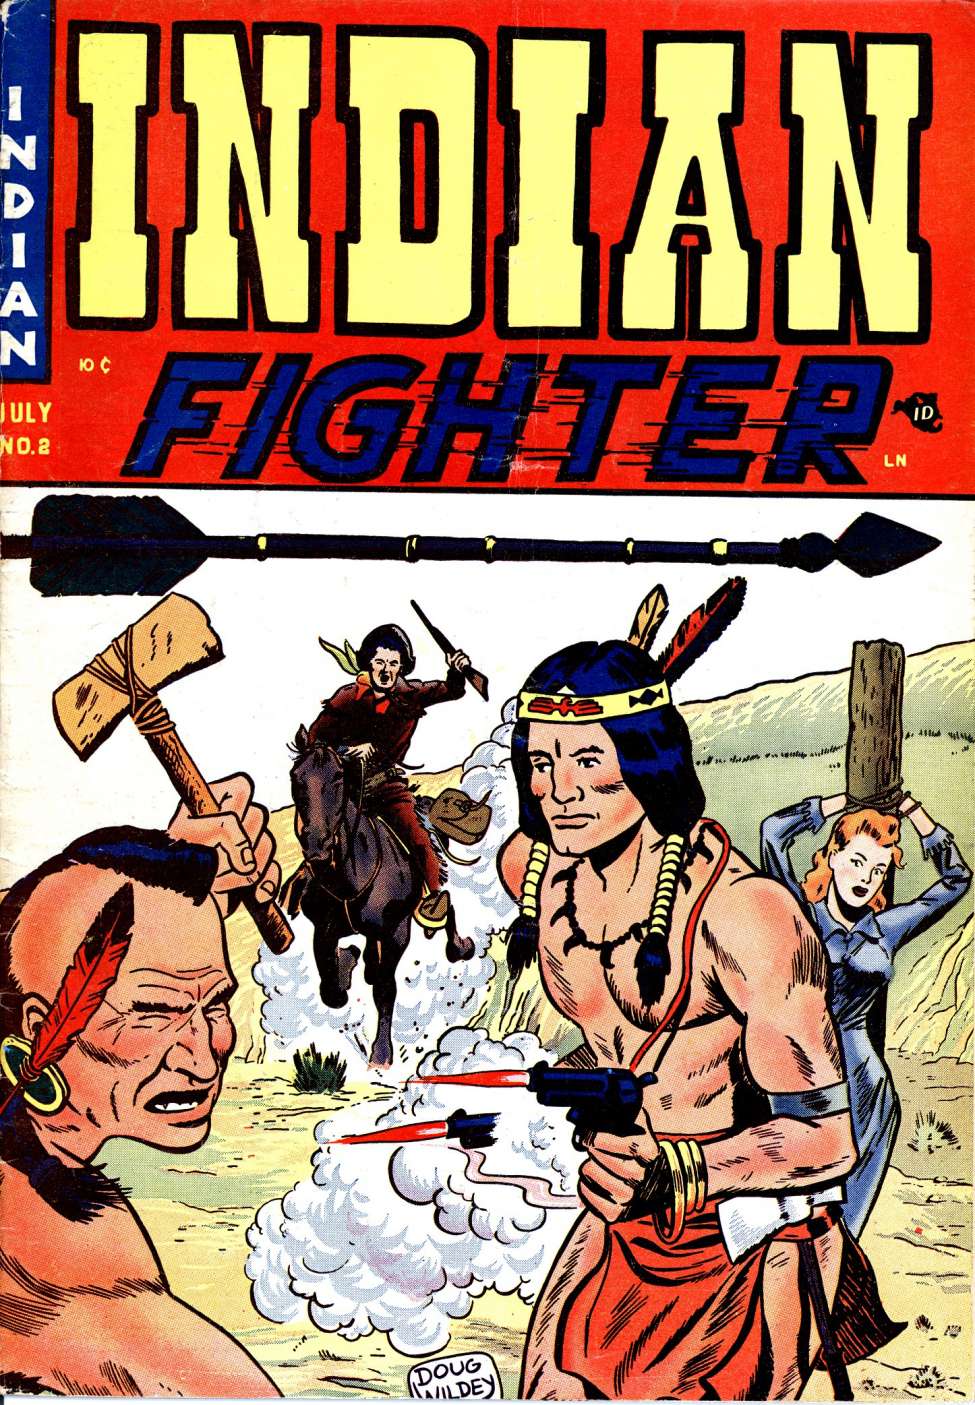 Comic Book Cover For Indian Fighter 2